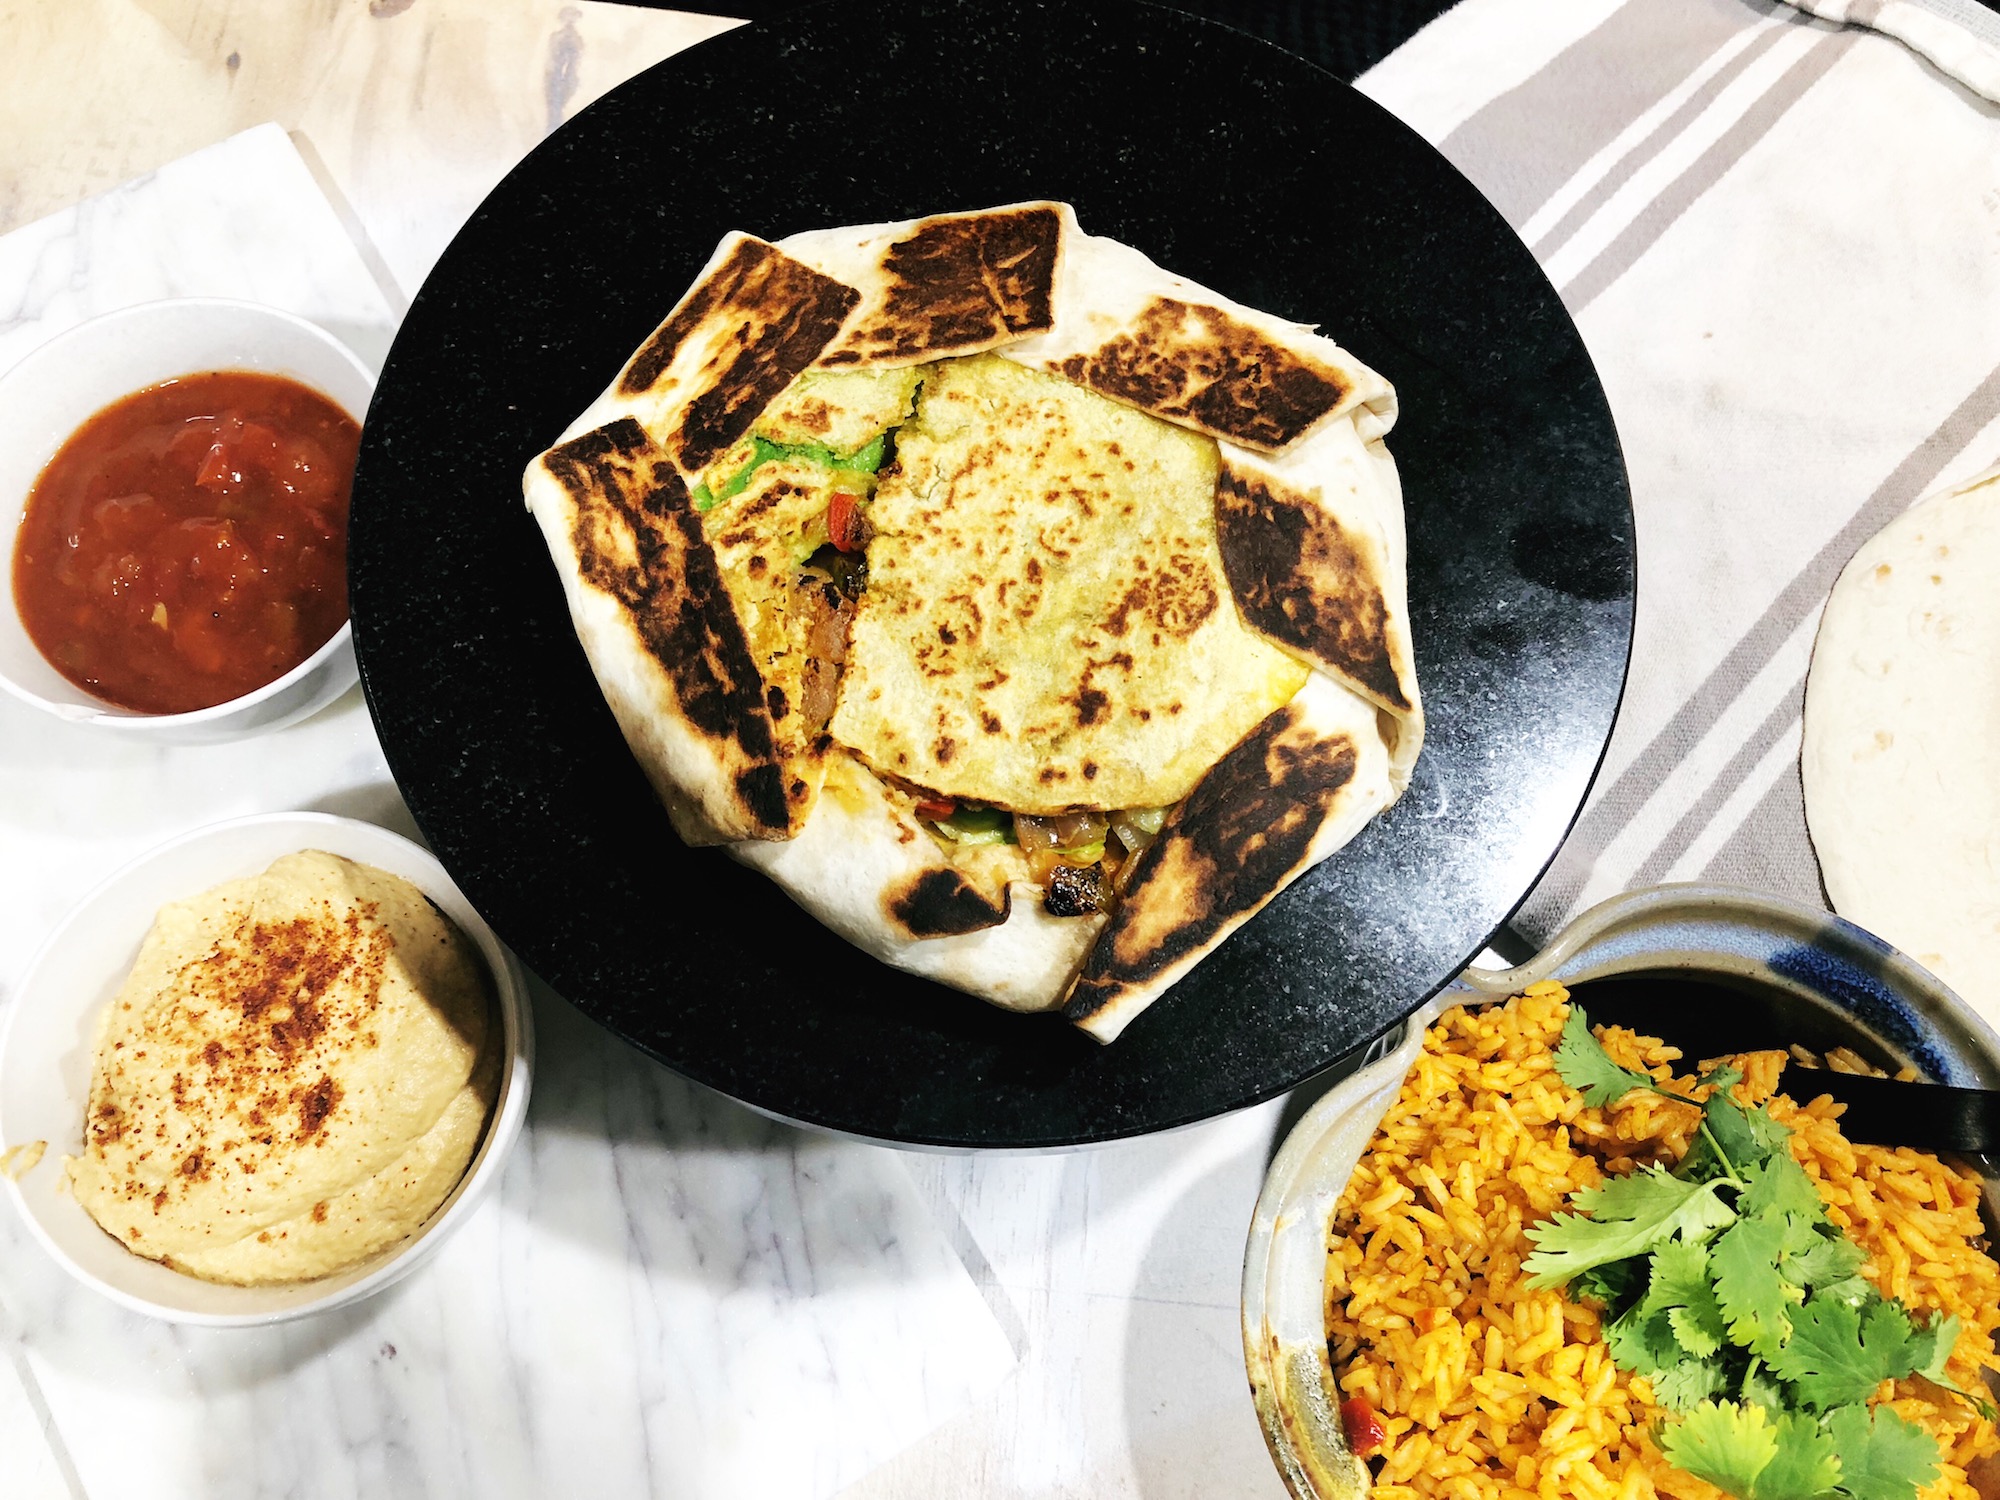 Big Easy Meals with Supreme Rice